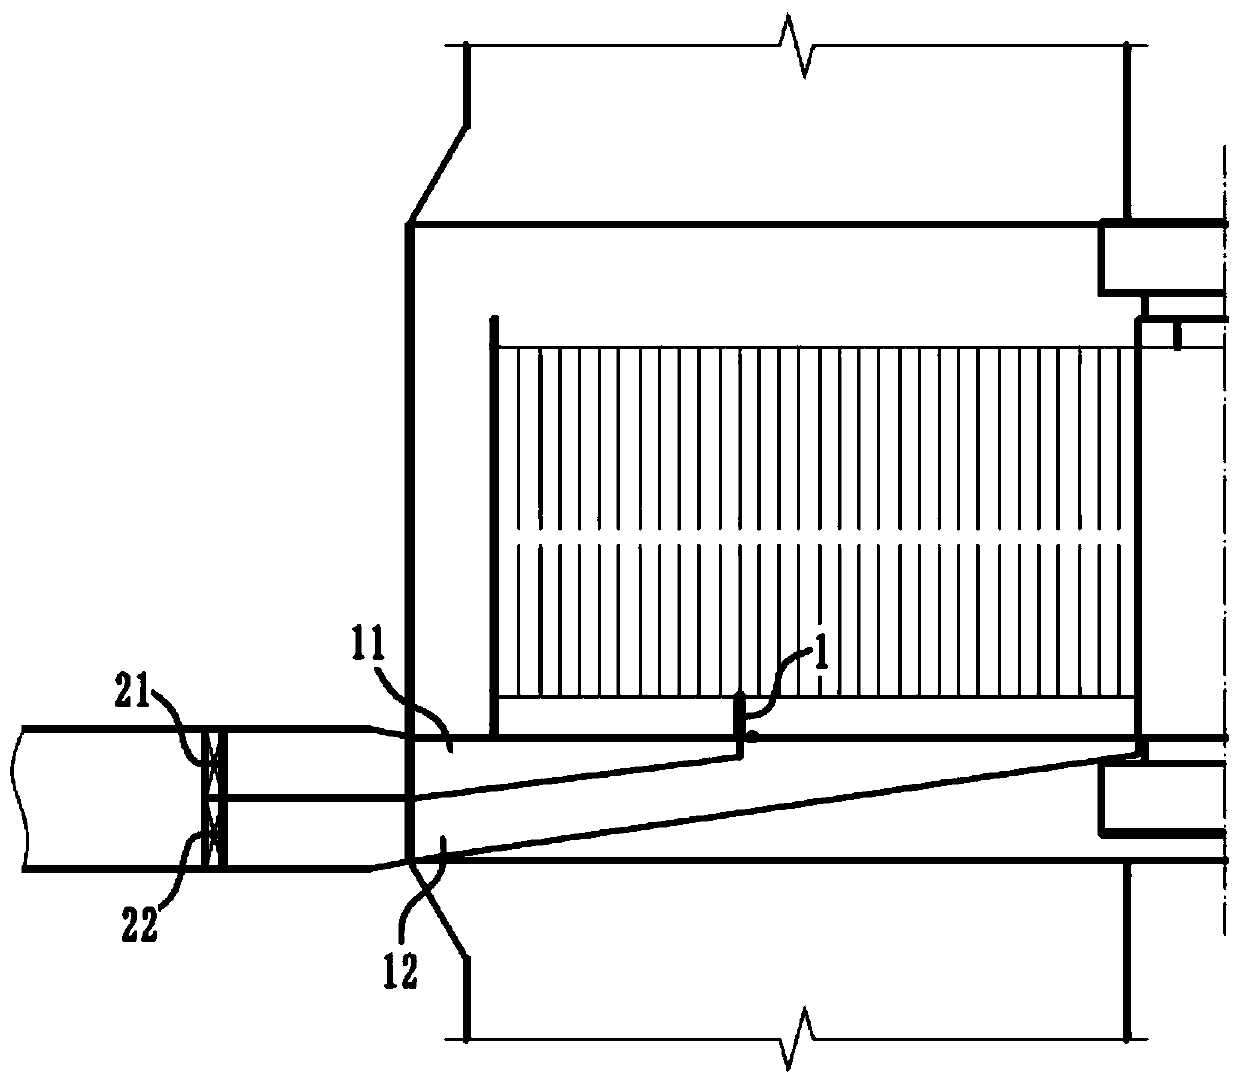 A method for anti-clogging of heat storage elements at cold end of air preheater by separating rings